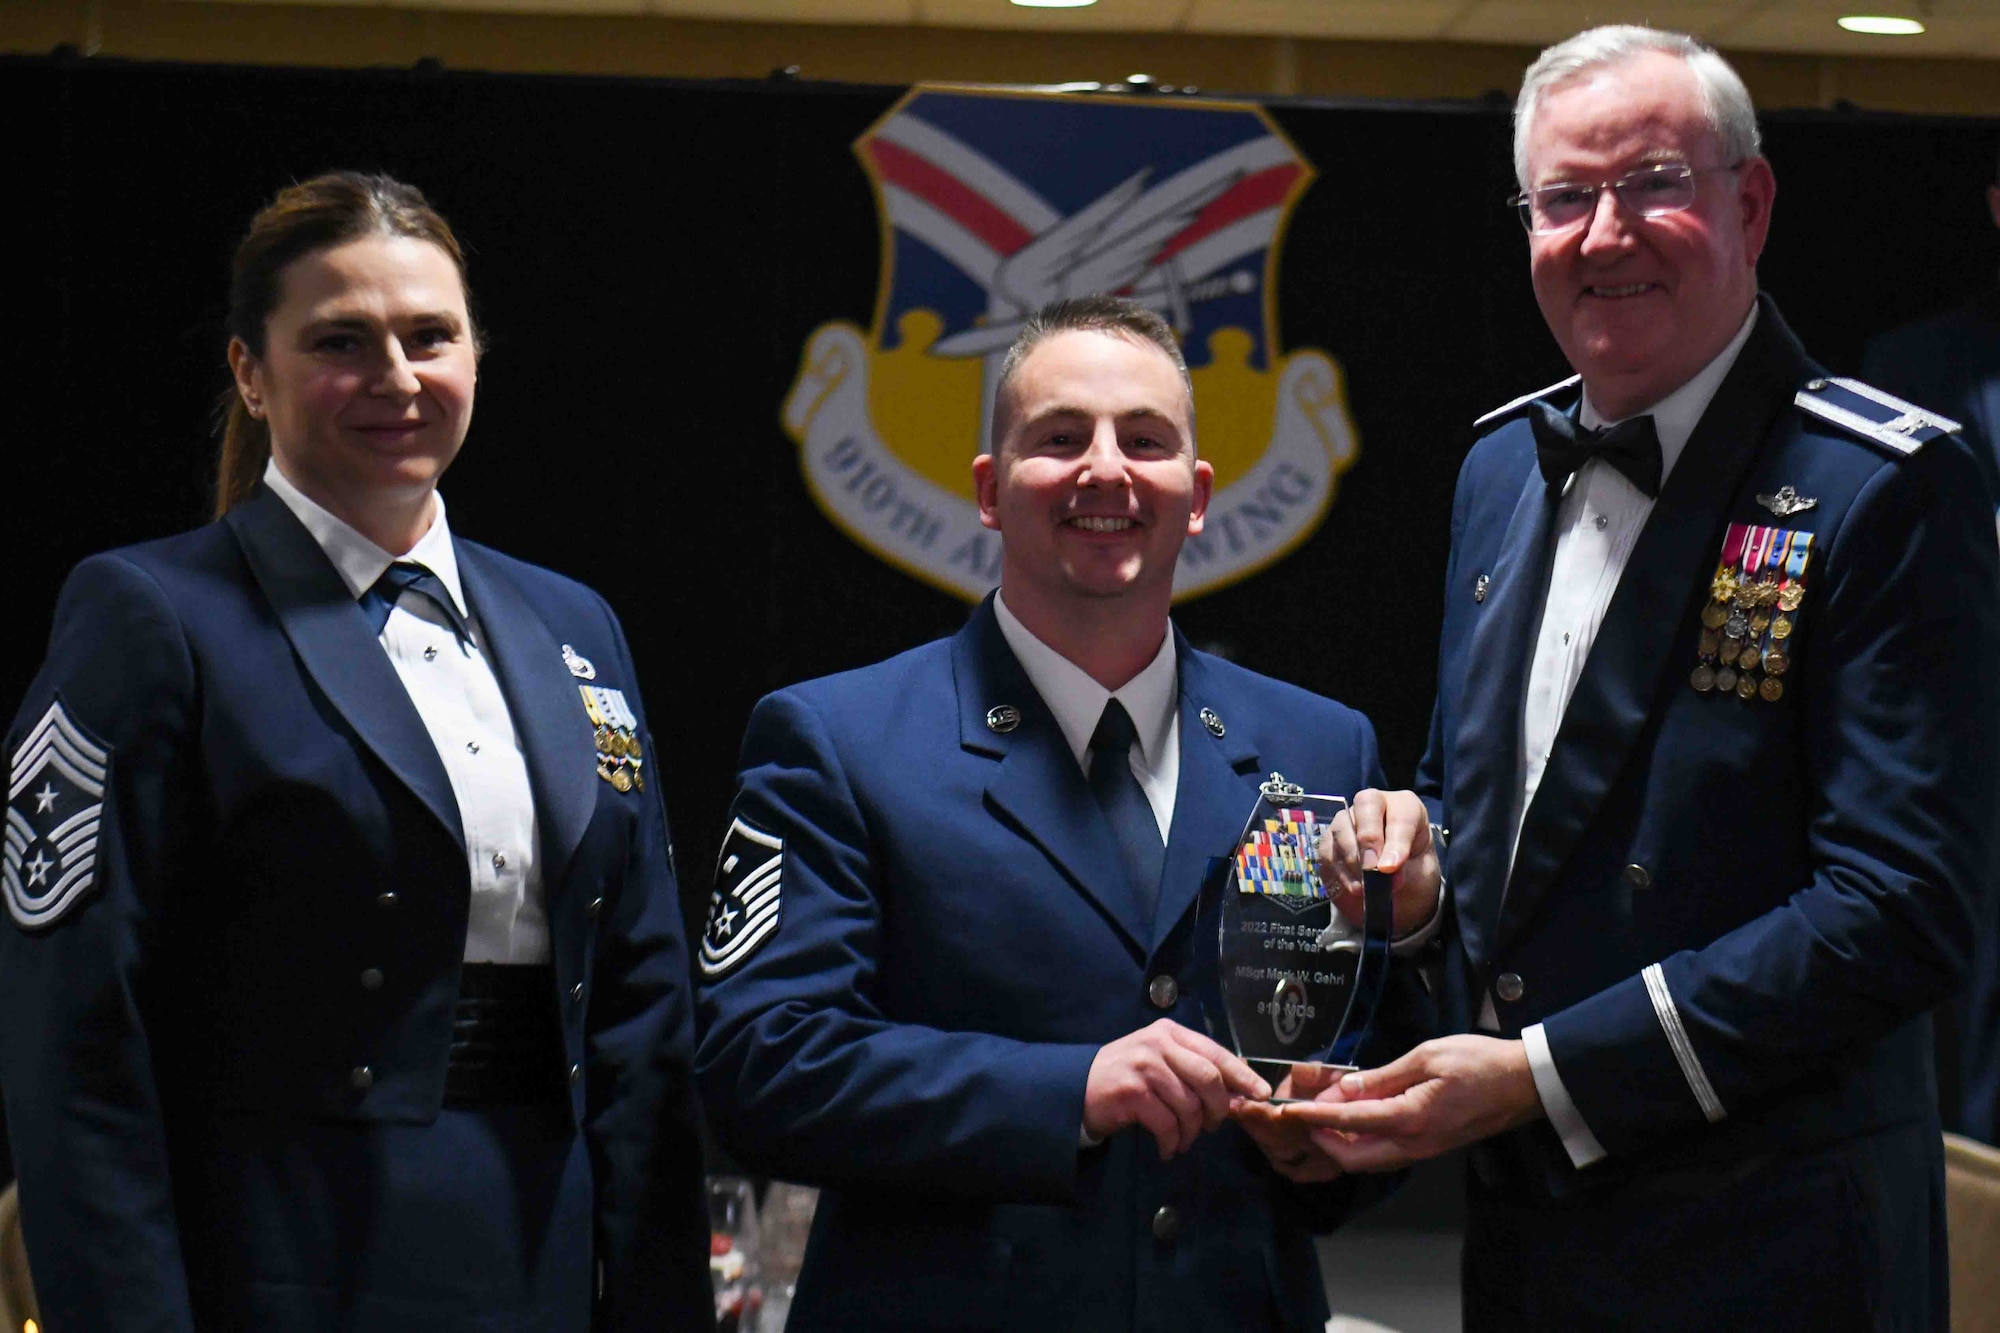 Master Sgt. Mark Gehri, first sergeant assigned to the 910th Medical Squadron, receives the 2022 First Sergeant of the Year award from 910th Airlift Wing Commander Col. Jeff Van Dootingh (right) and 910th AW Command Chief Master Sgt. Jennifer McKendree (left), during the unit’s annual awards banquet, March 4, 2023, at Youngstown Air Reserve Station, Ohio.